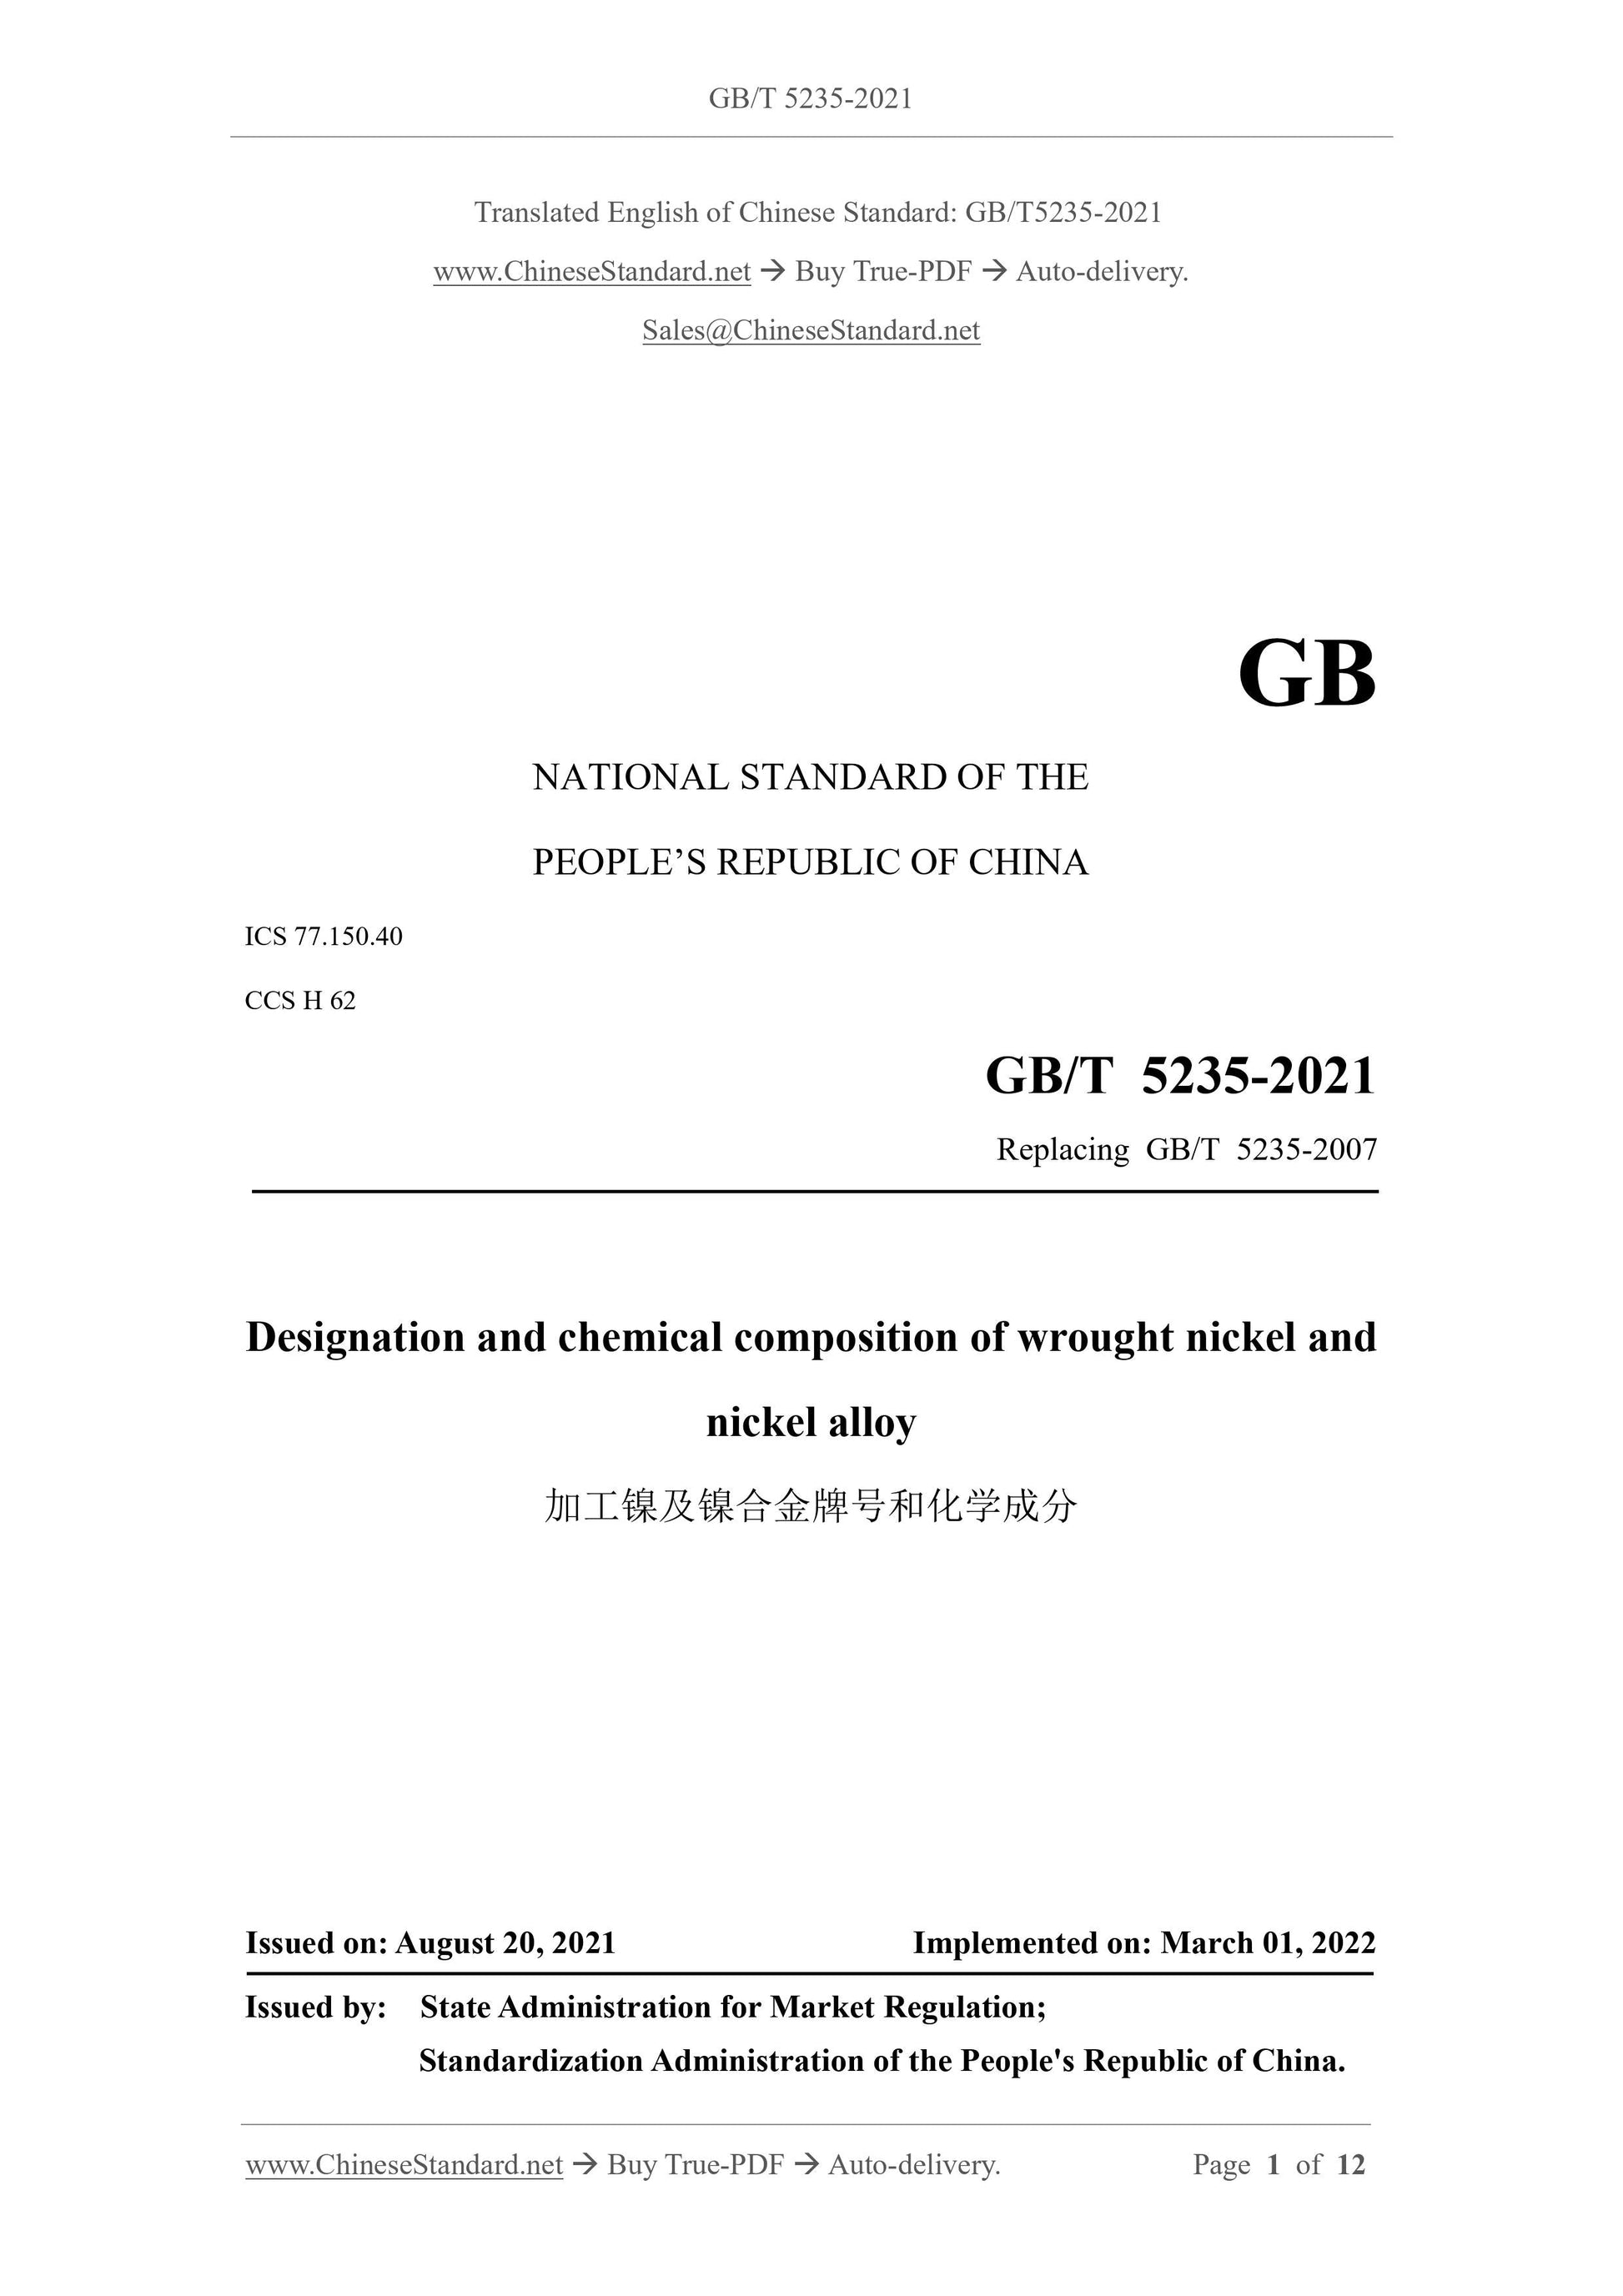 GB/T 5235-2021 Page 1